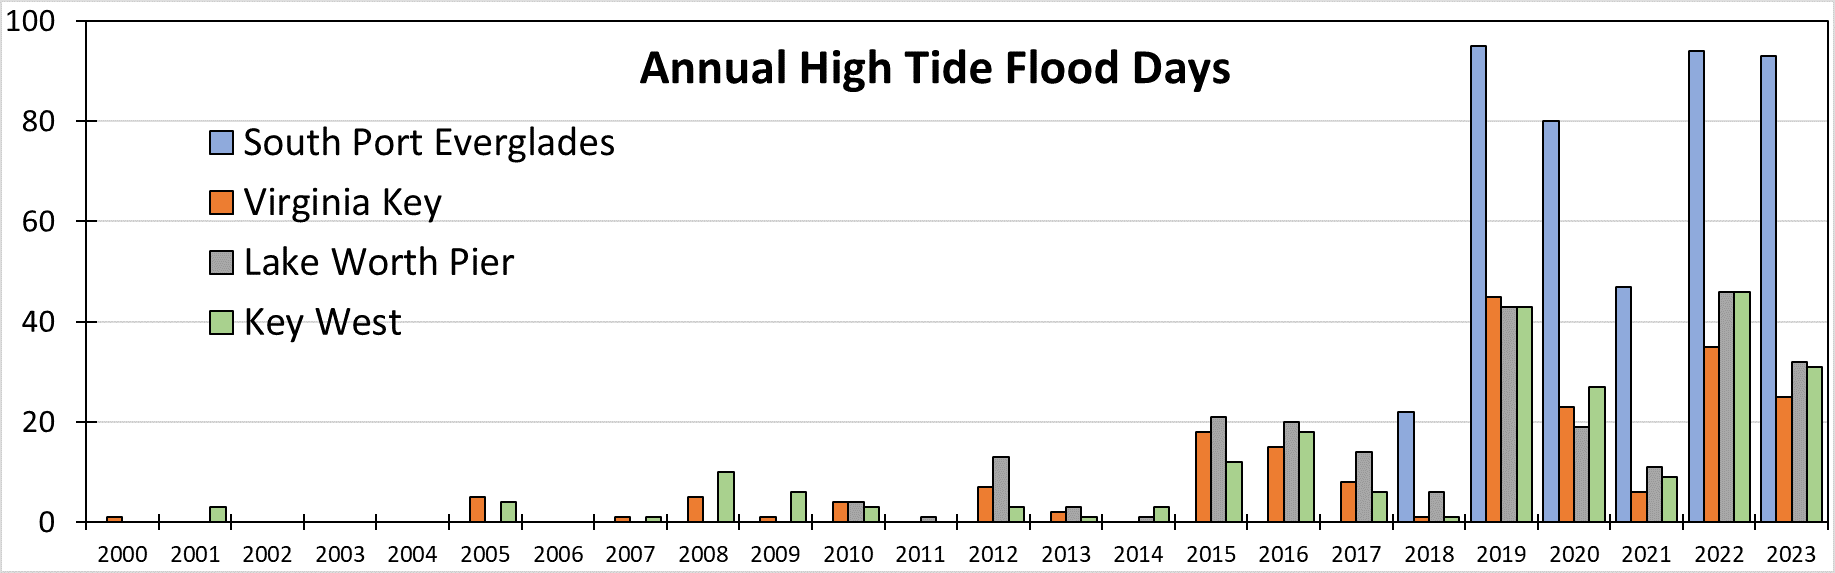 AnnualFloodDays.png